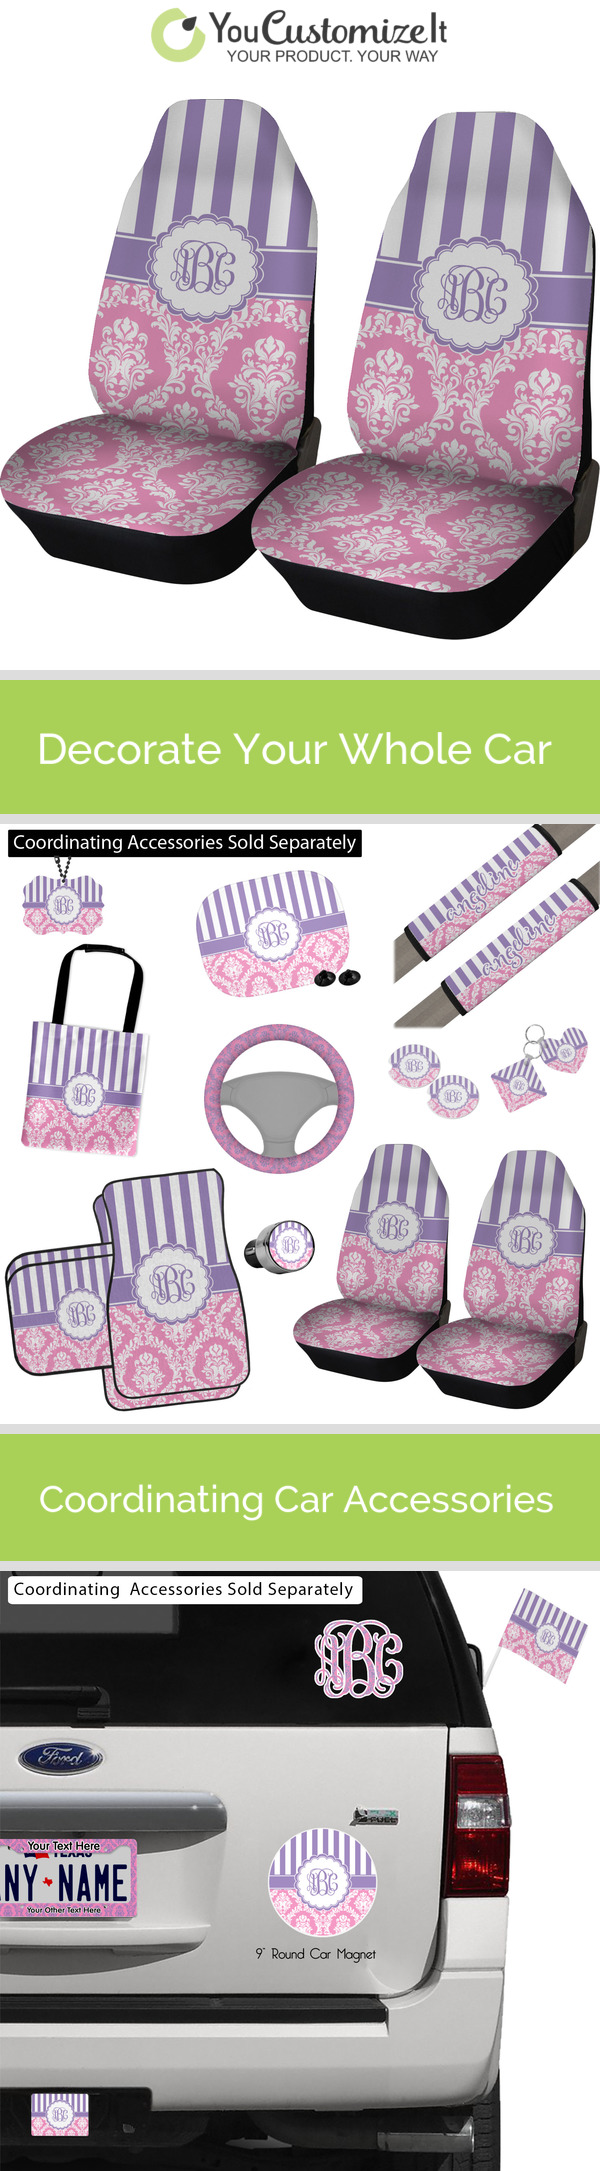 Custom Purple Damask & Dots Car Seat Covers (Set of Two) (Personalized)